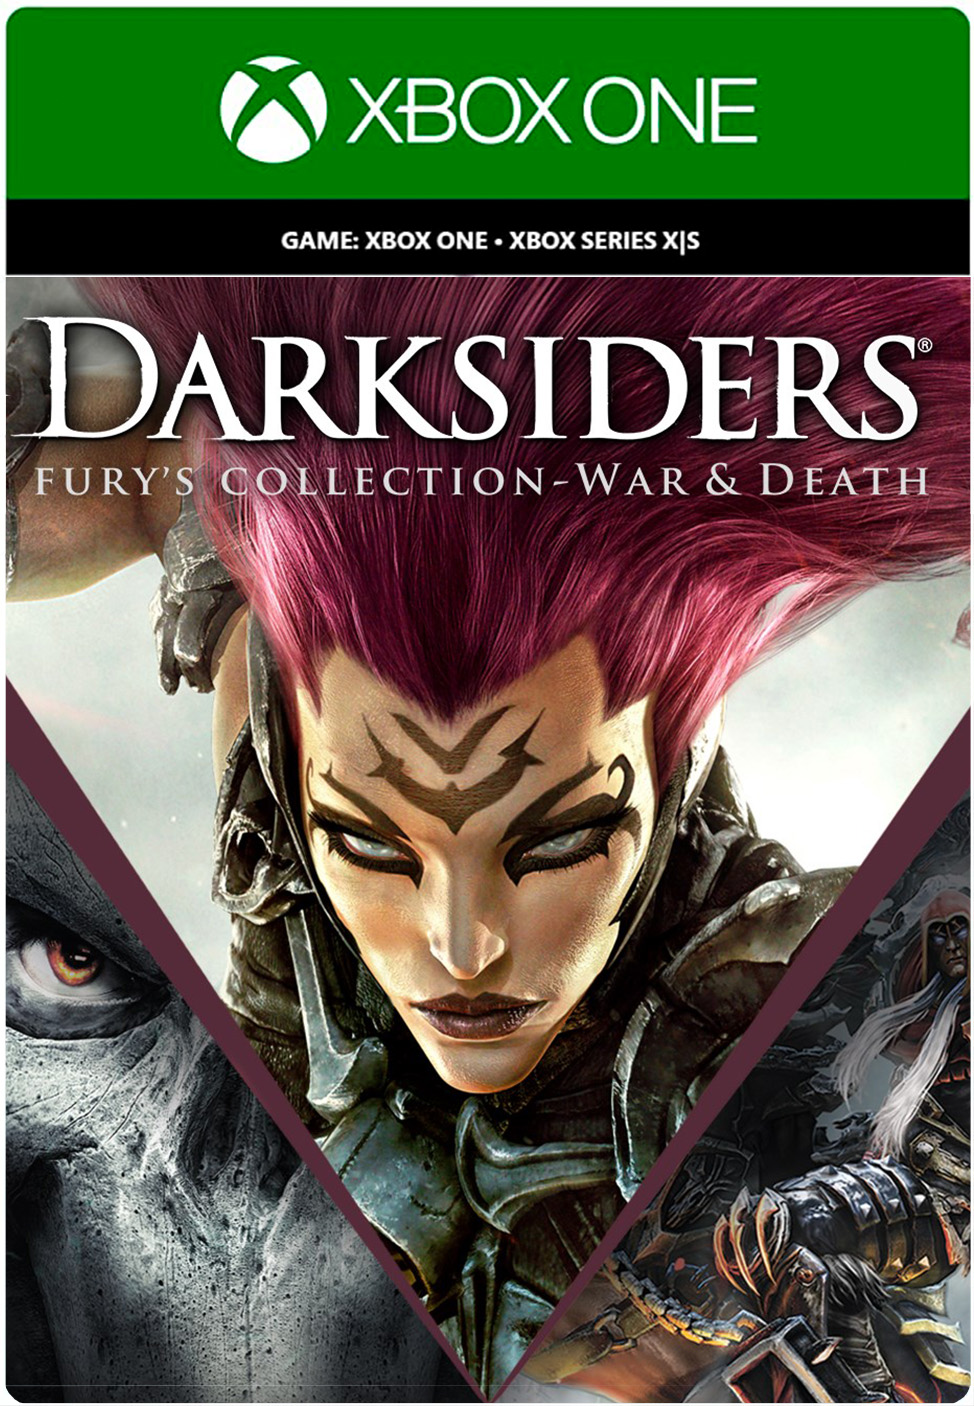  Darksiders Fury's Collection - War and Death  Xbox One/Series X|S,  ,   